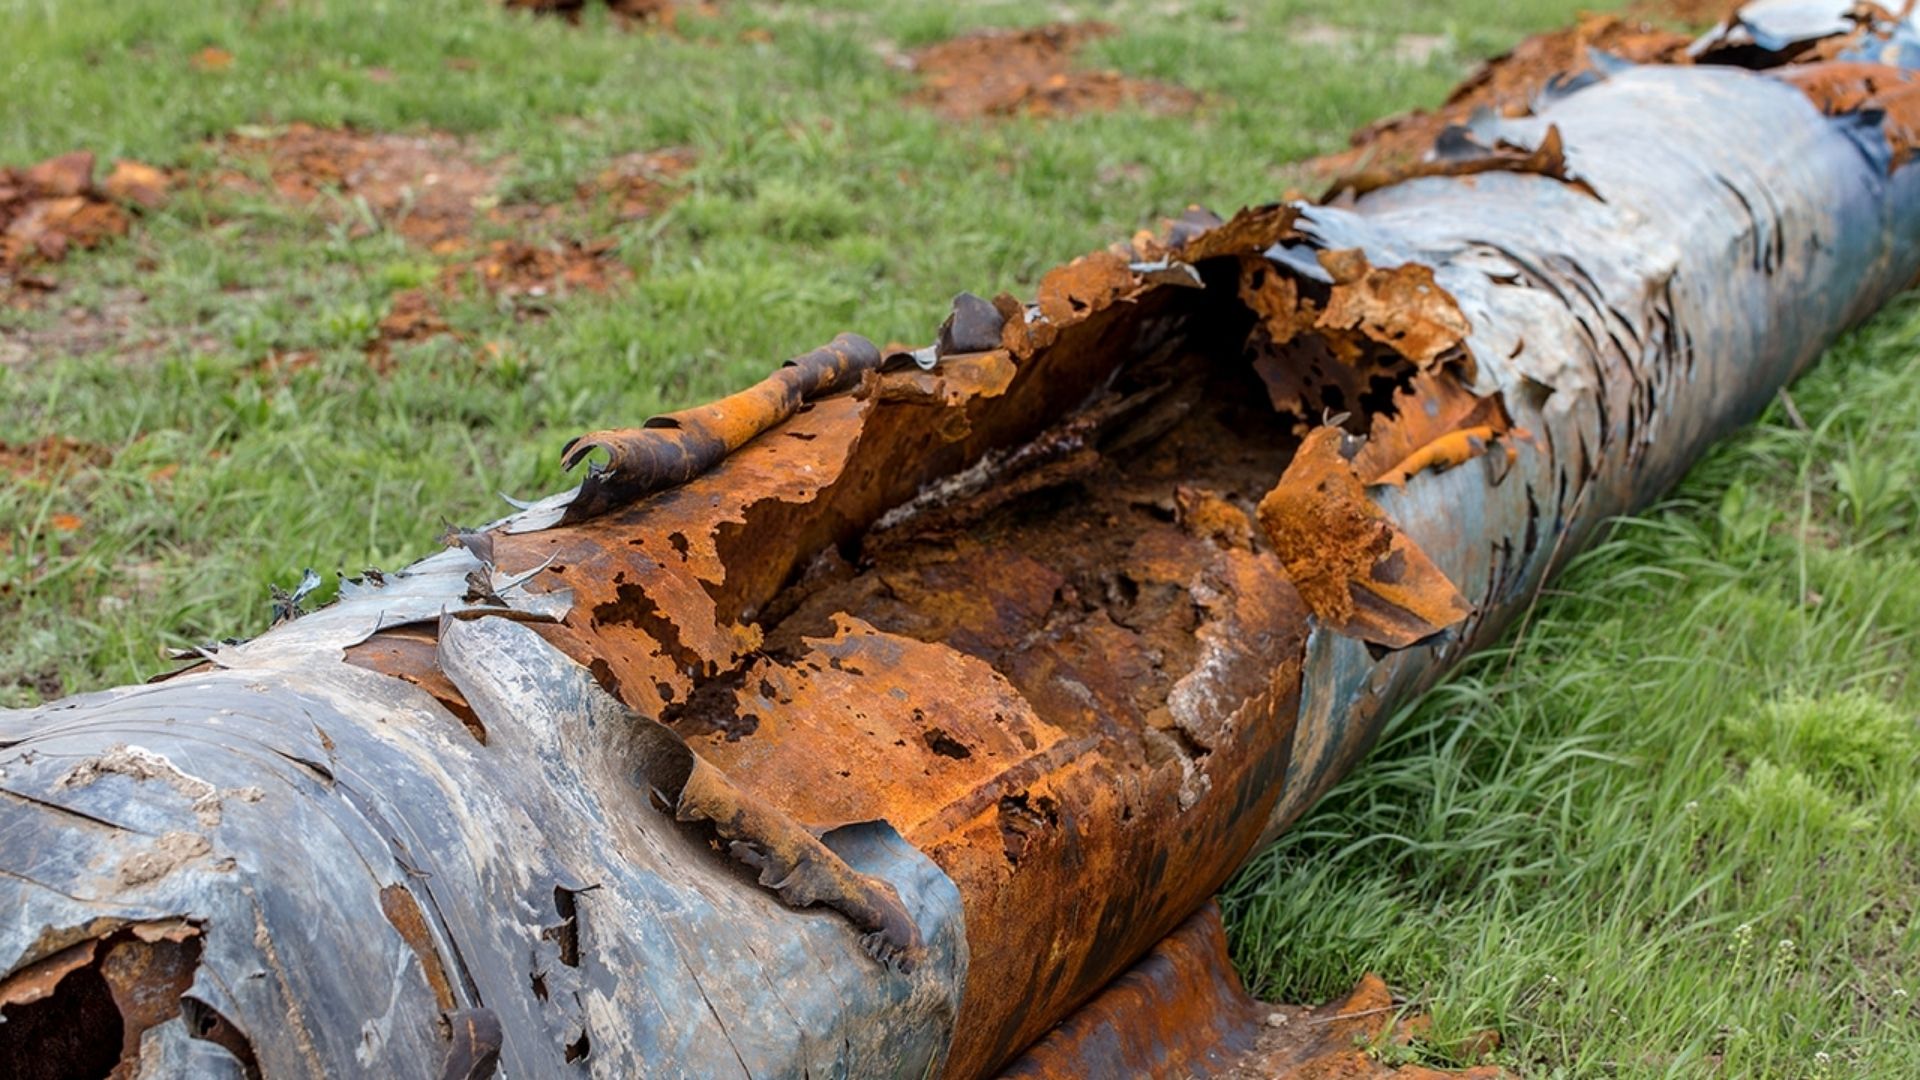 Large Corroded Pipe On Grass